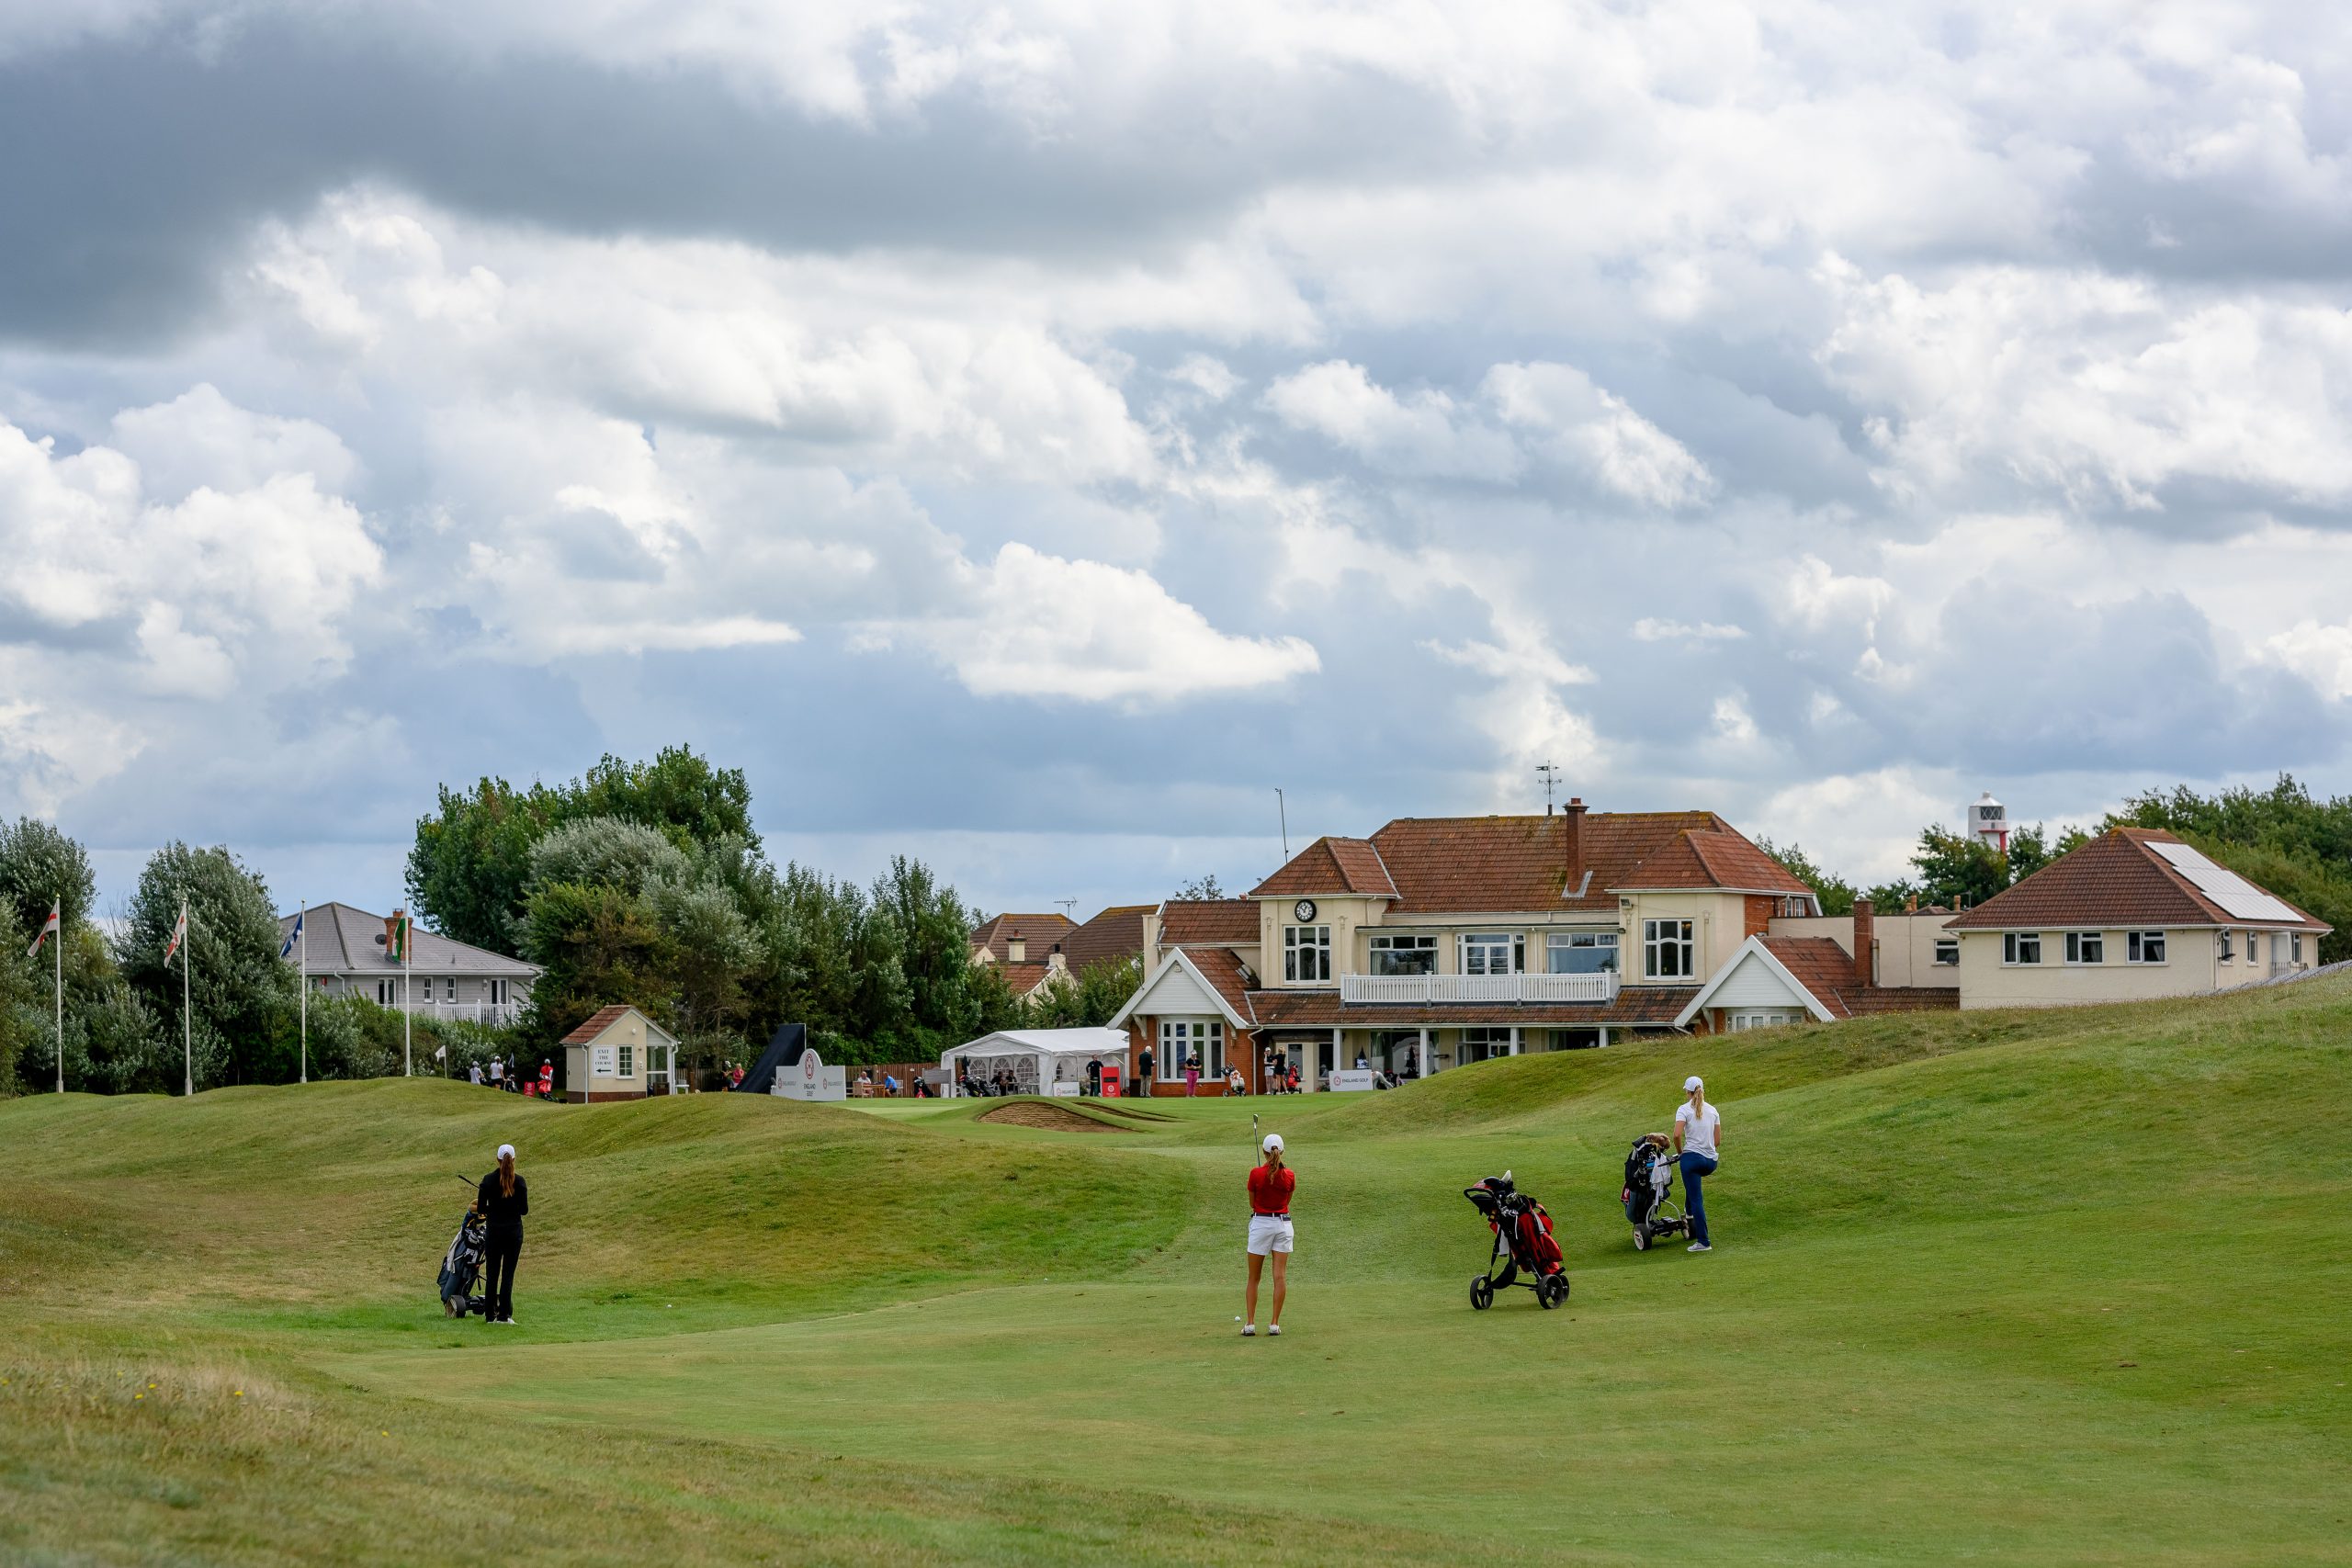 England Golf - England Women’s Stroke Play 2020 at Burnham and Berrow day 1 - Up the 18th to the club House.